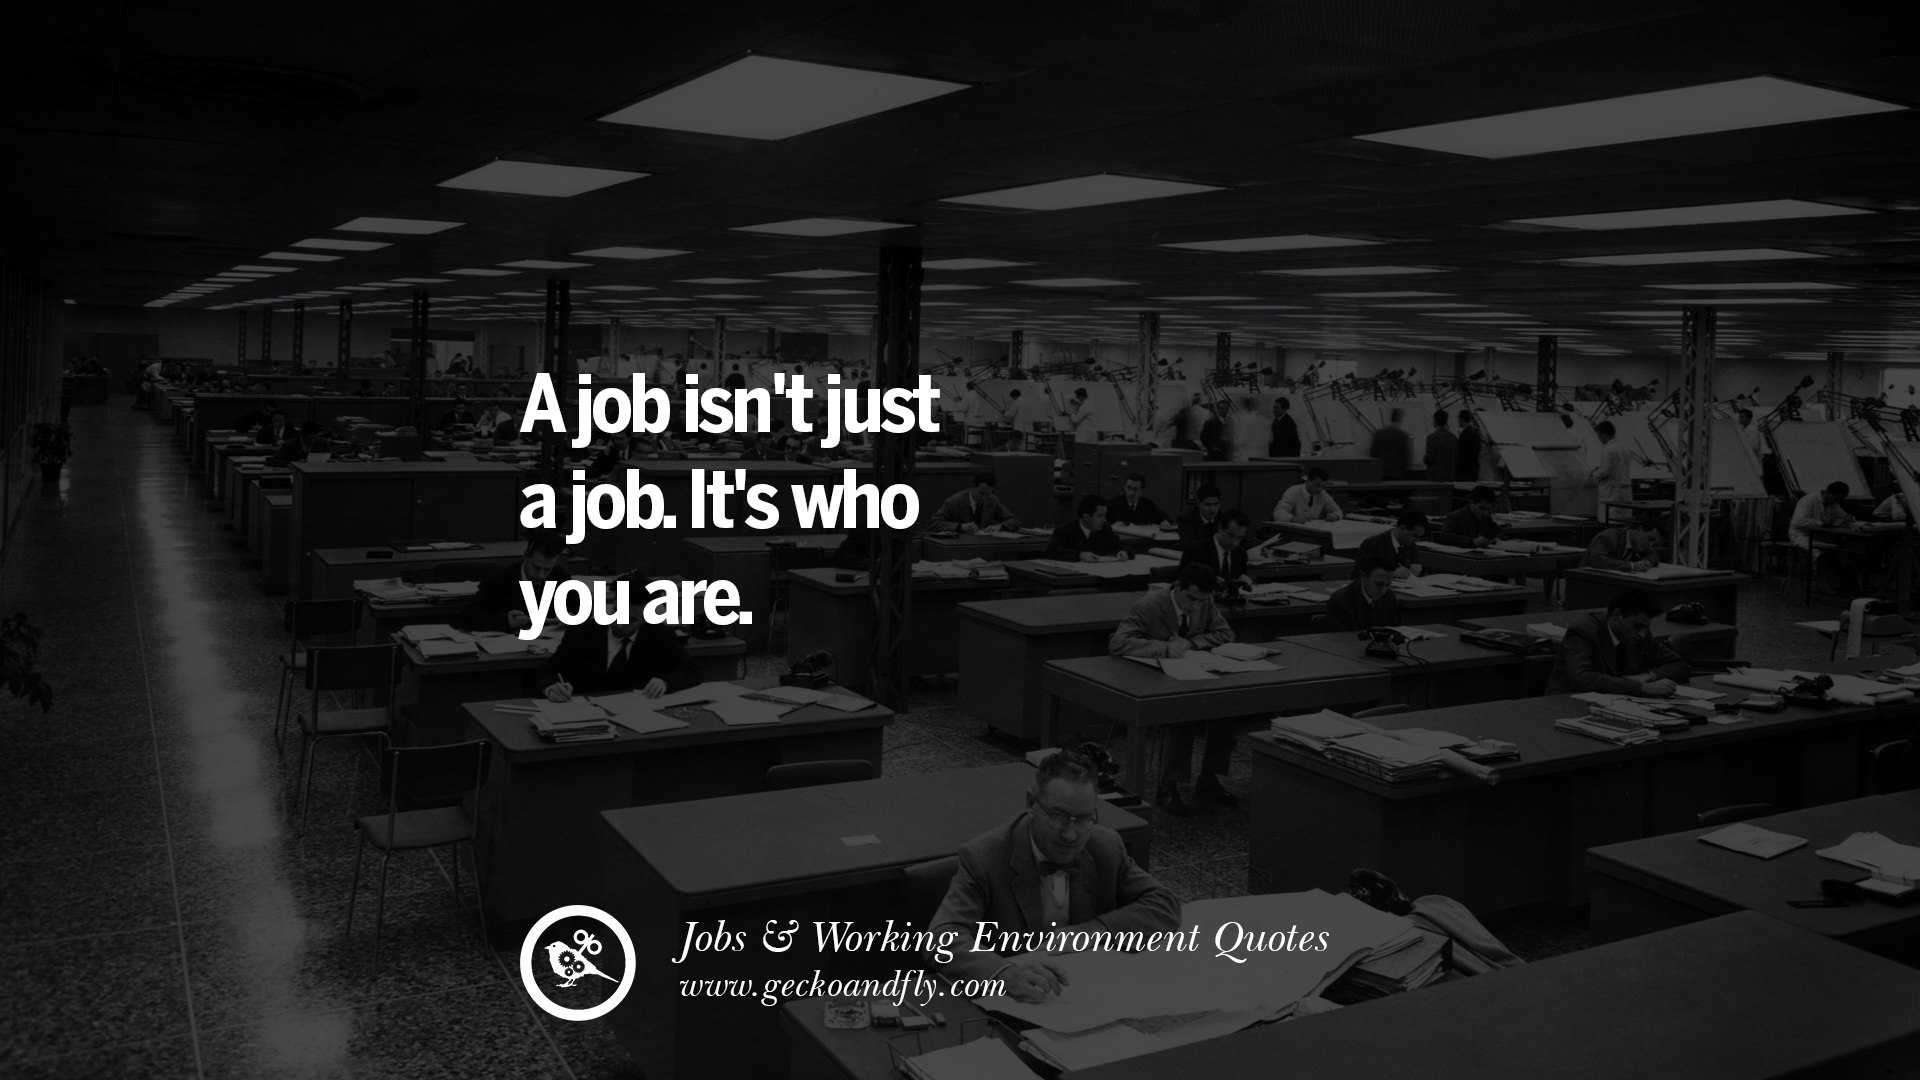 20 Quotes On Office Job Occupation, Working Environment and Career Success